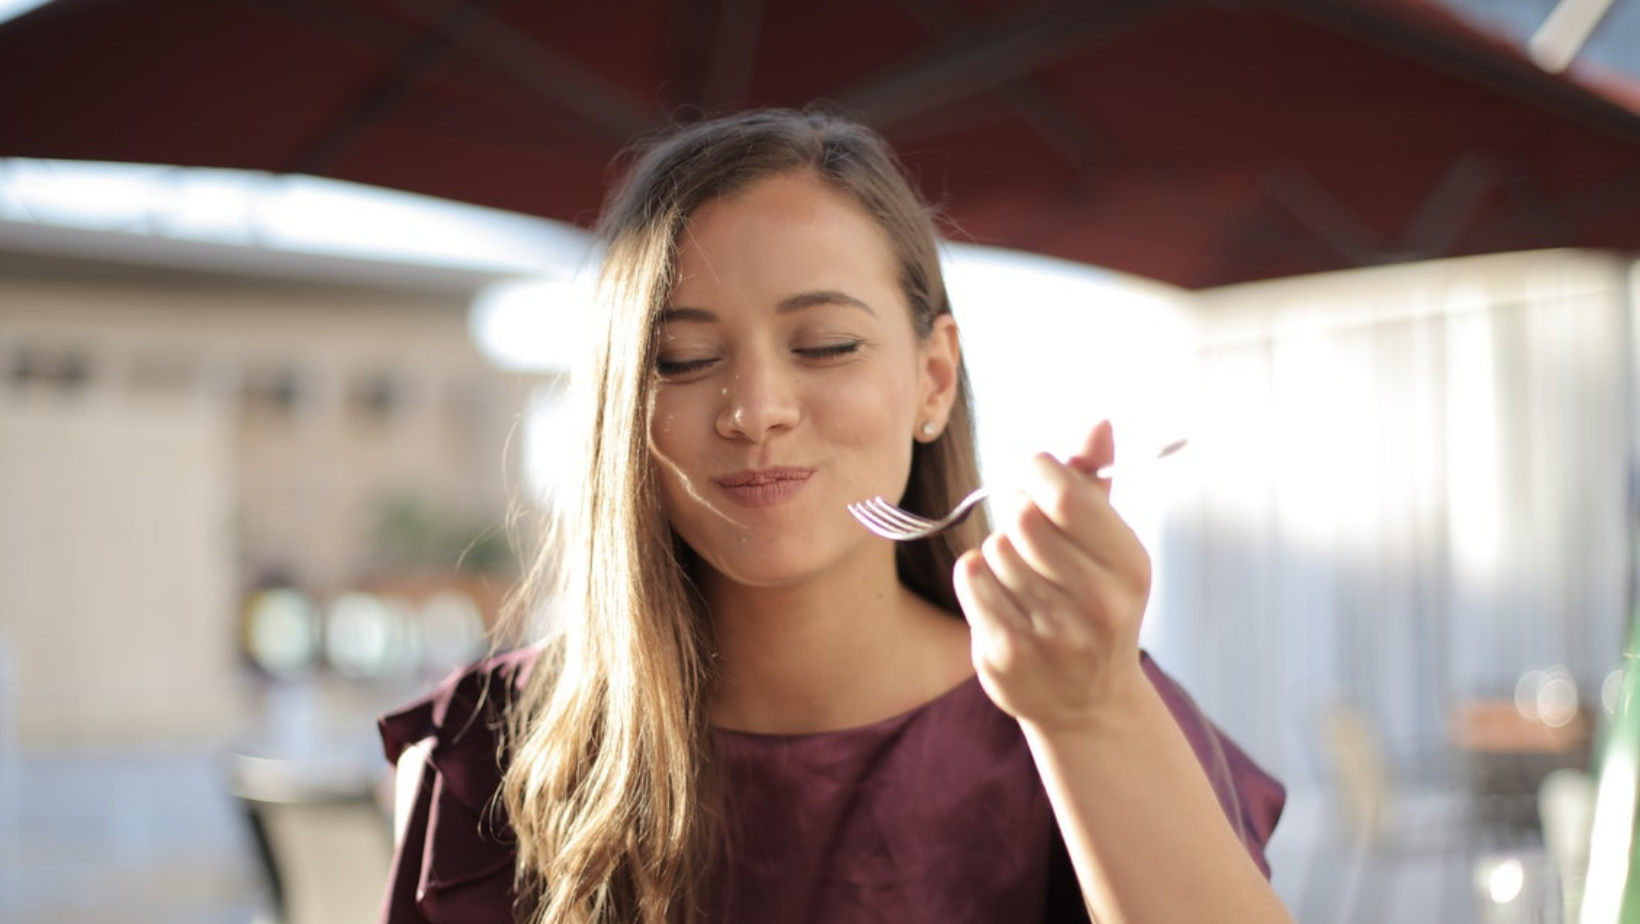 Woman smiles with mouth full, hand holding fork near her face